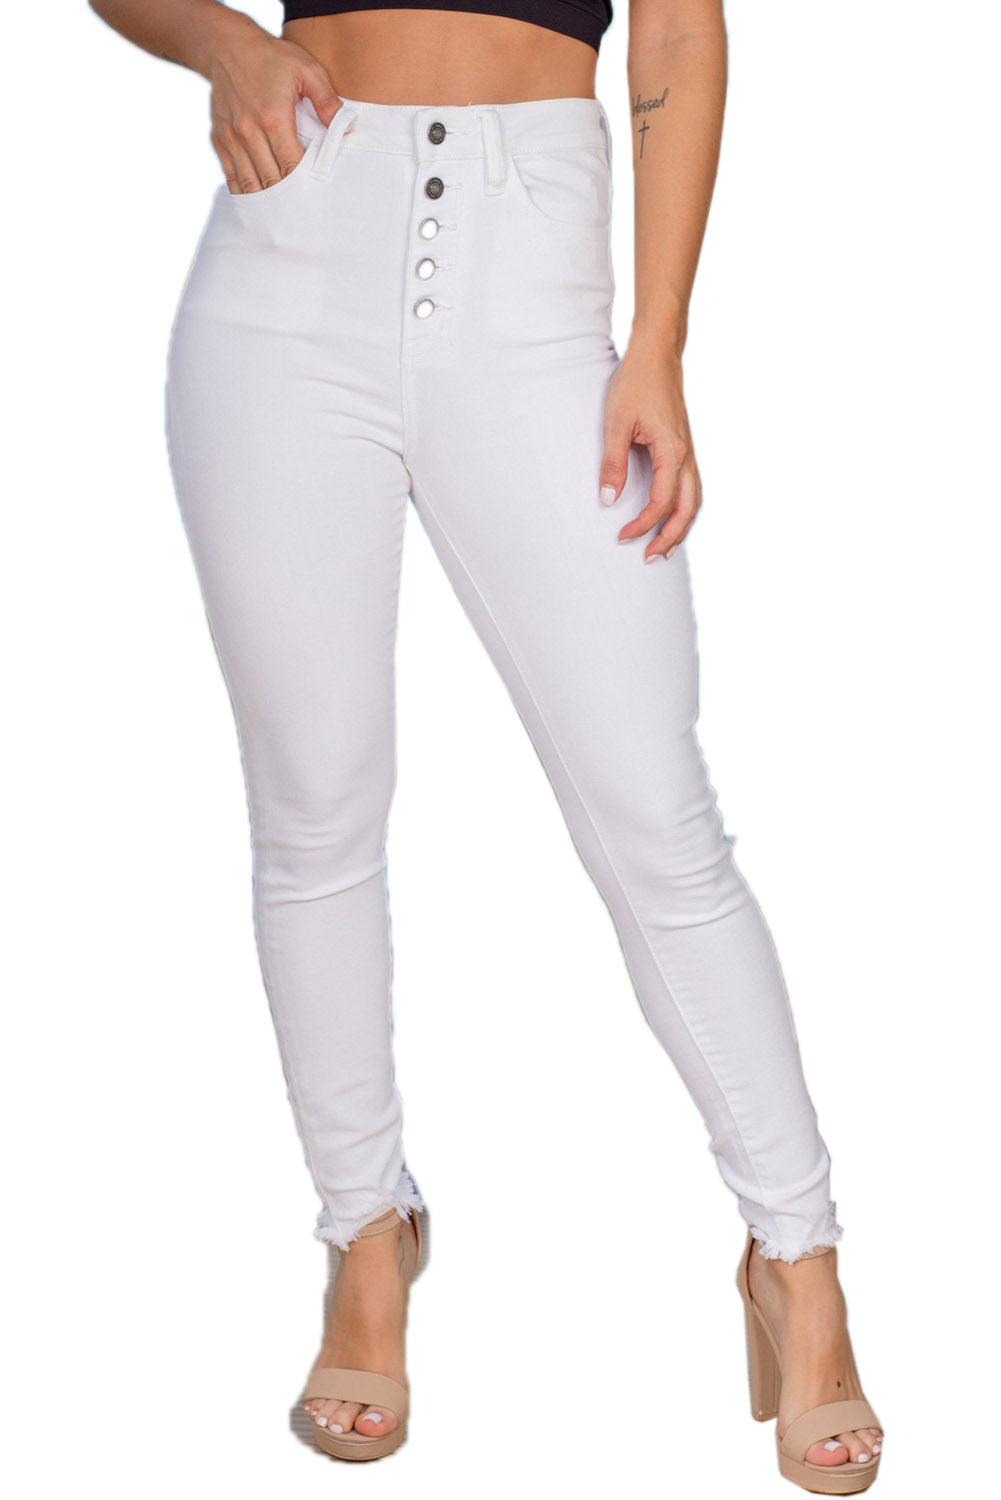 White Women's Skinny Jeans with Buttons Casual Stretchy High Waisted Jeans LC78896-1